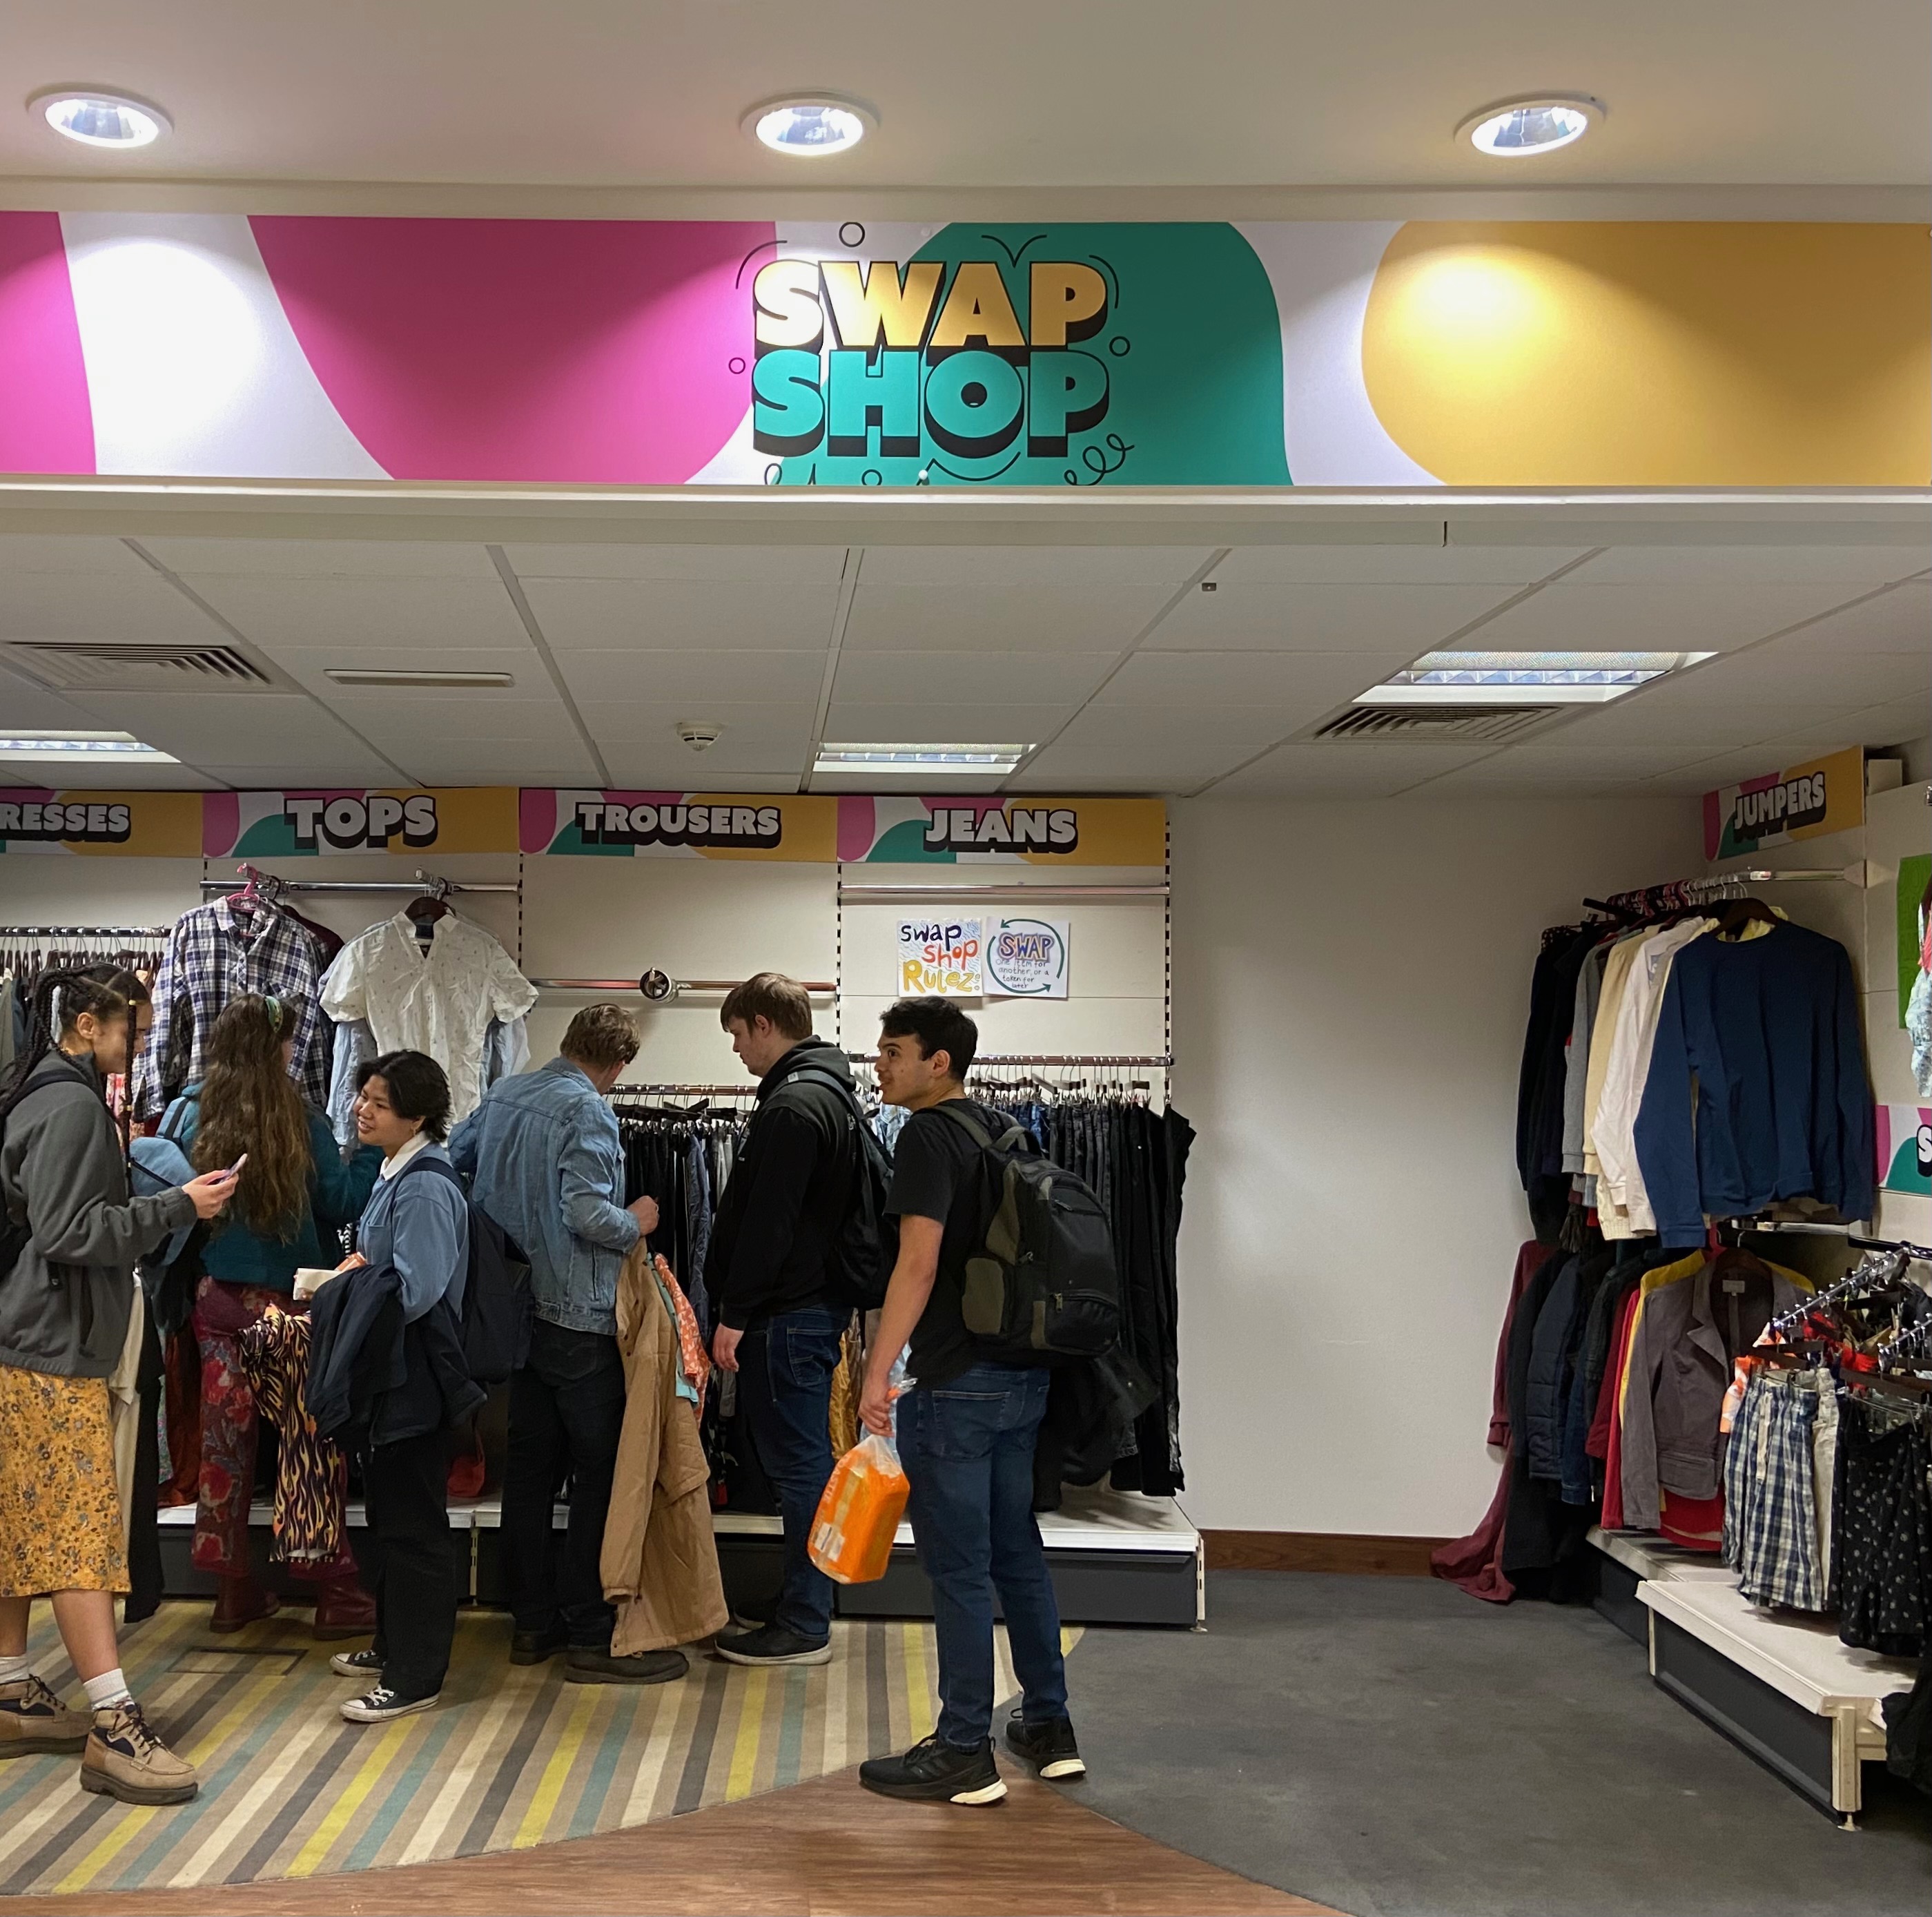 Sheffield's Student Union opens first Swap Shop Press